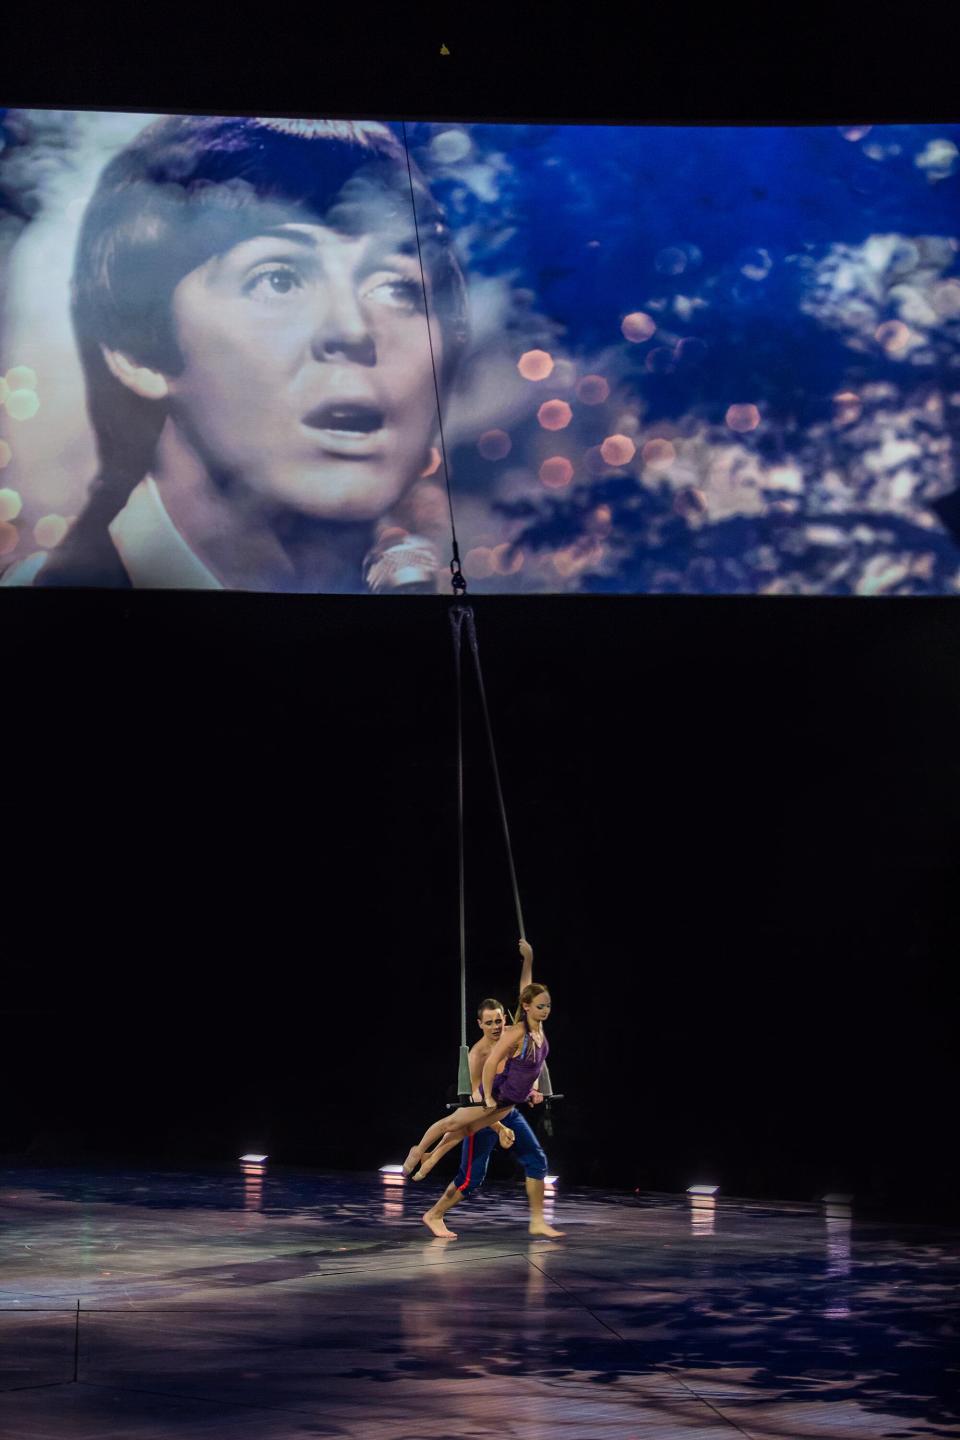 Trapeze specialists perform to "Yesterday" during The Beatles' Cirque du Soleil show, "Love," in Las Vegas.